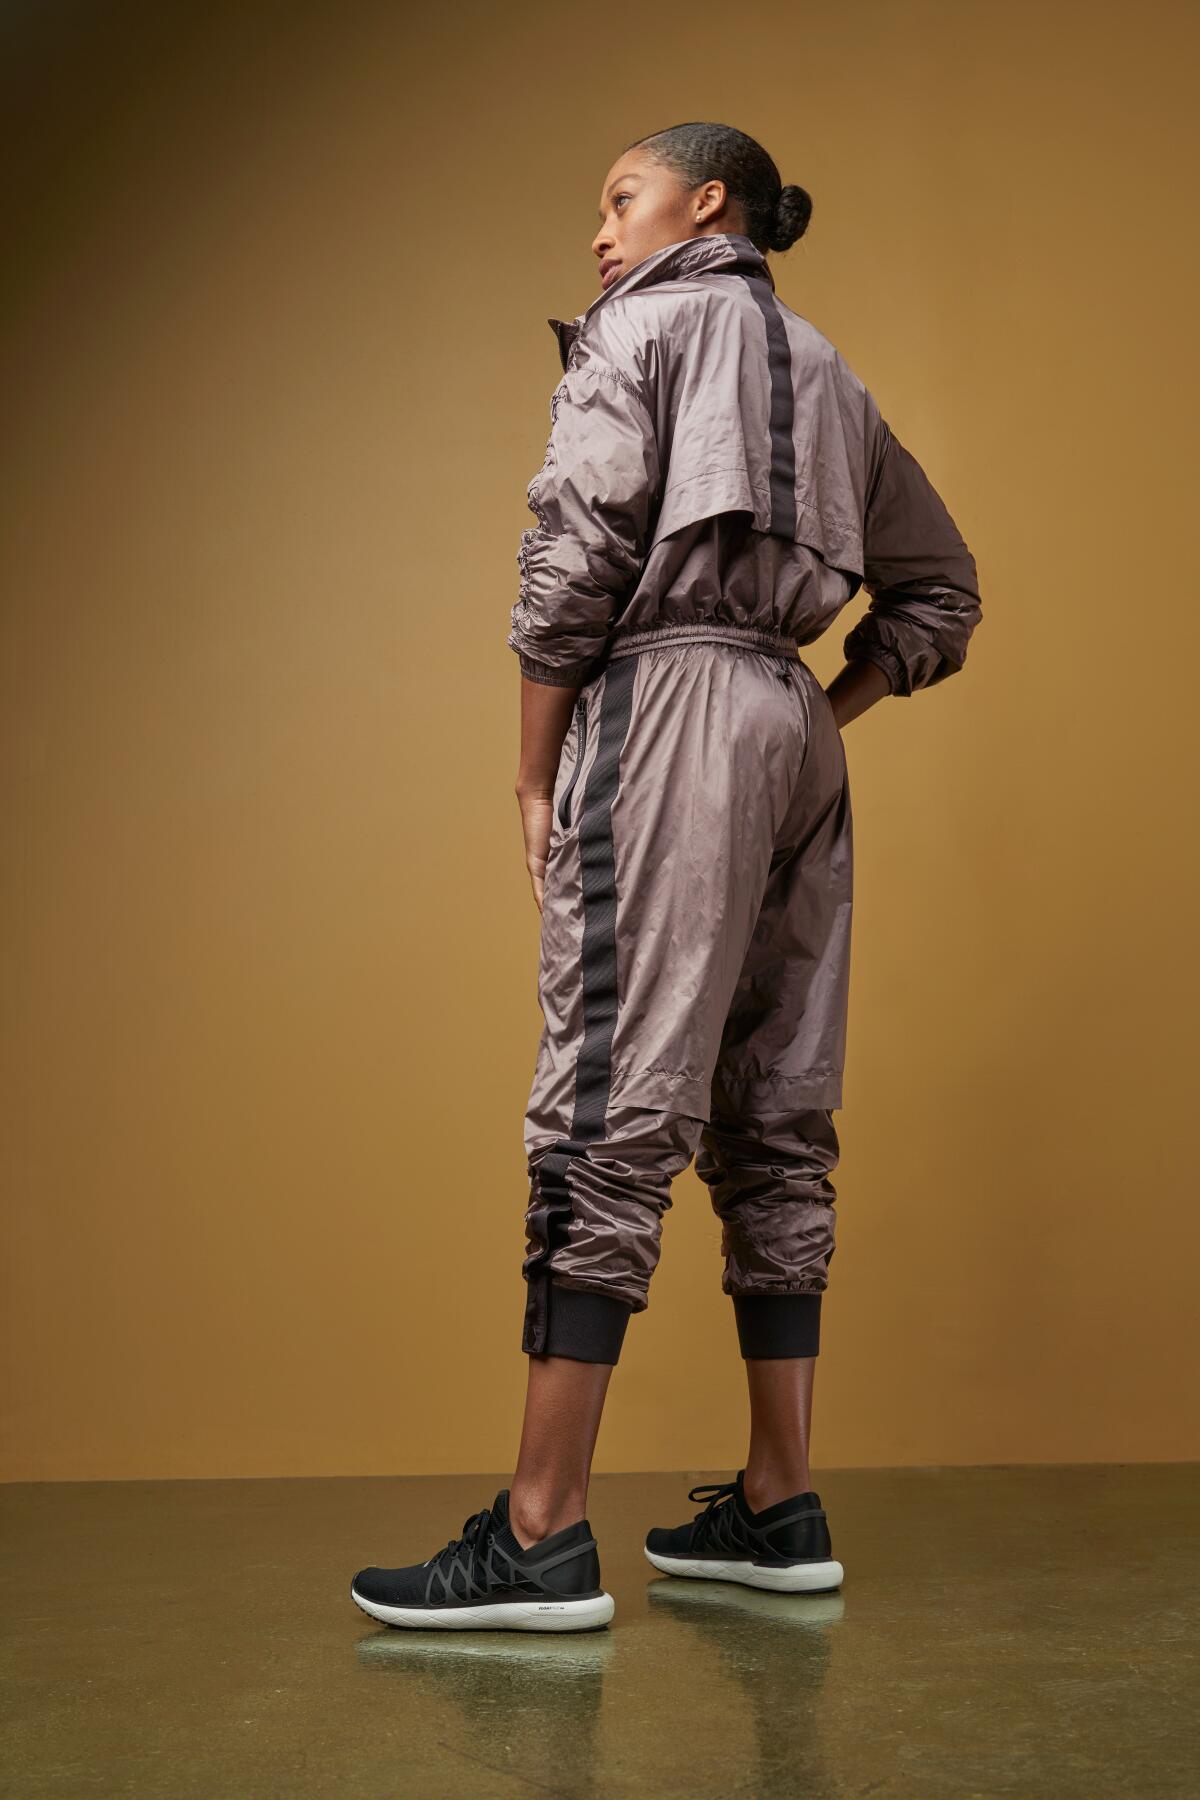 A track suit from Athleta and Allyson Felix.